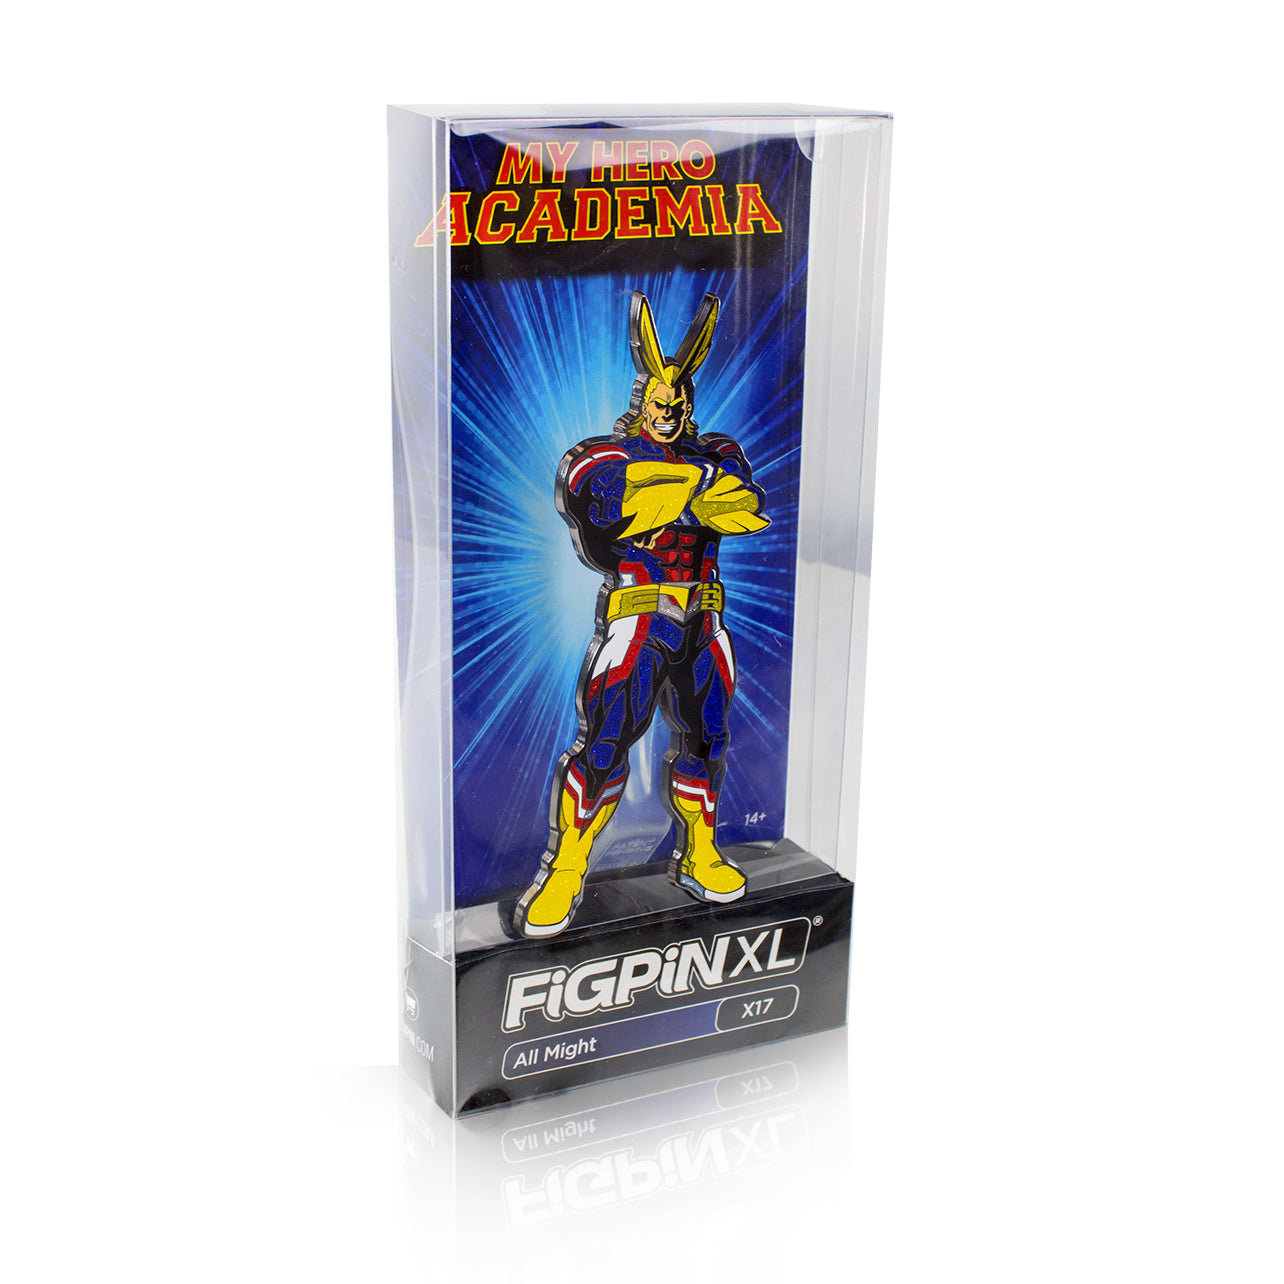 My Hero Academia - All Might Glitter FiGPiN XL (#X17) image count 1